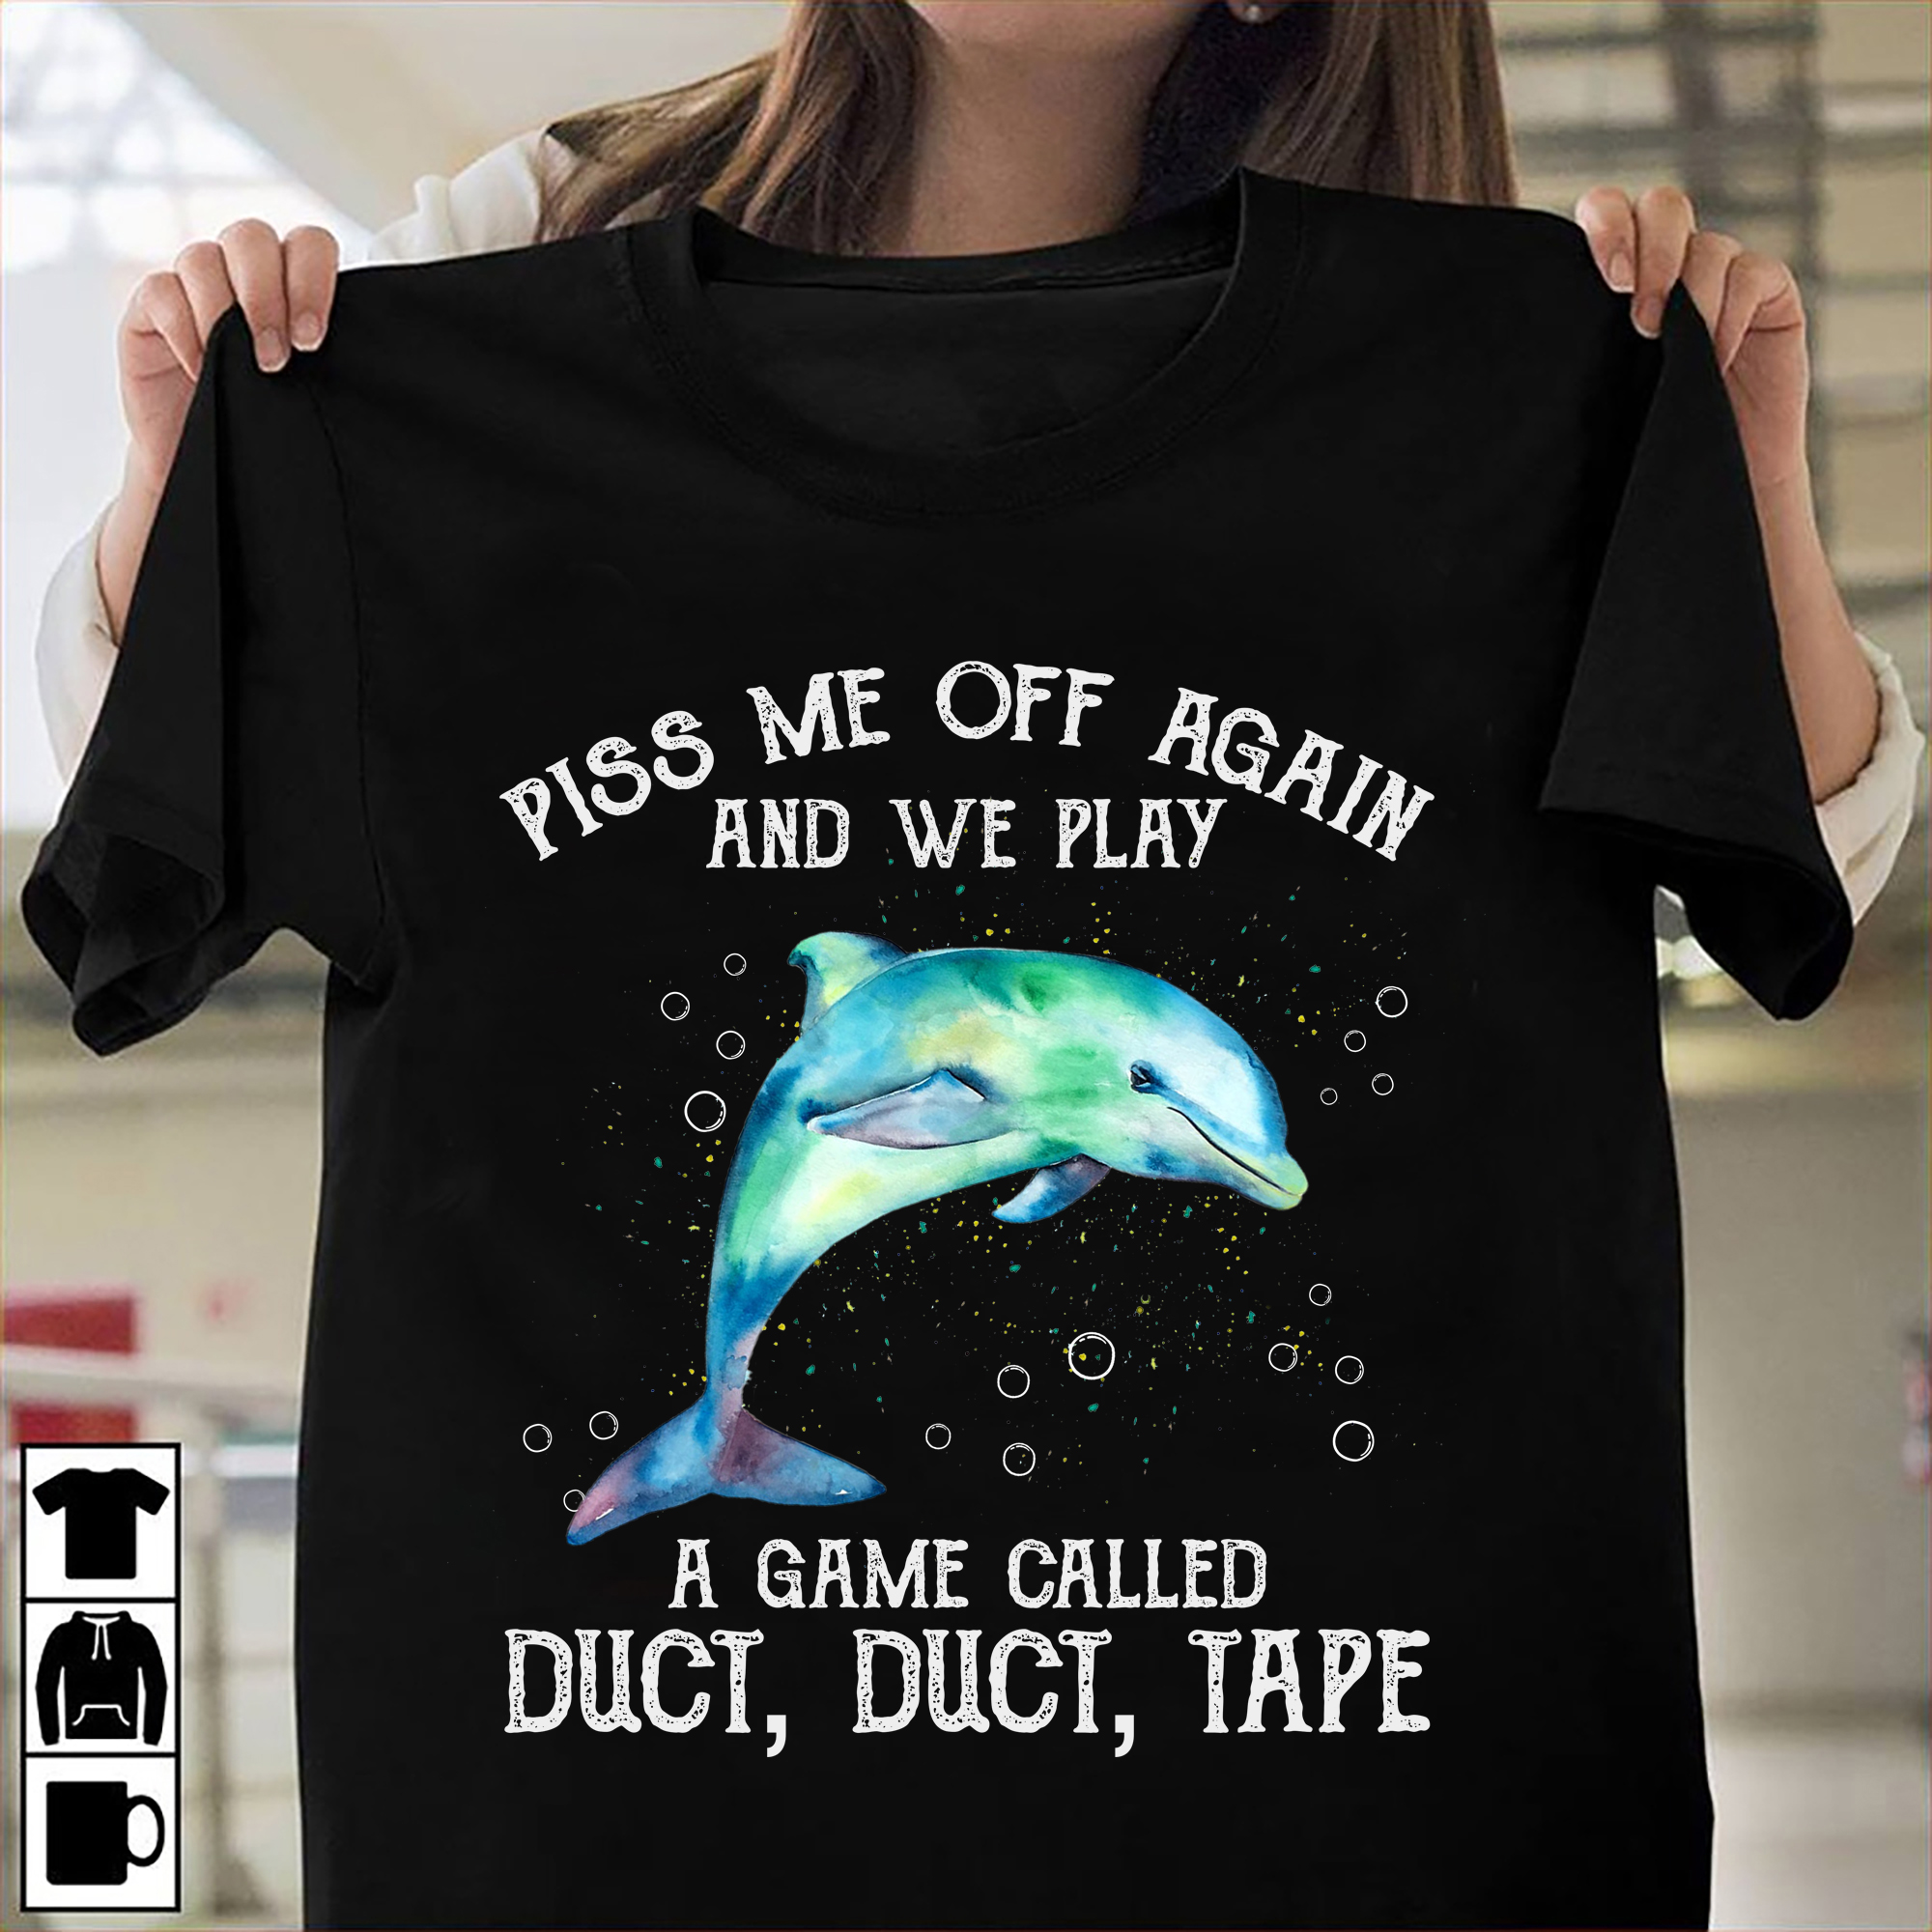 Piss me off again and we play a game called duct, duct, tape - Dolphin lover